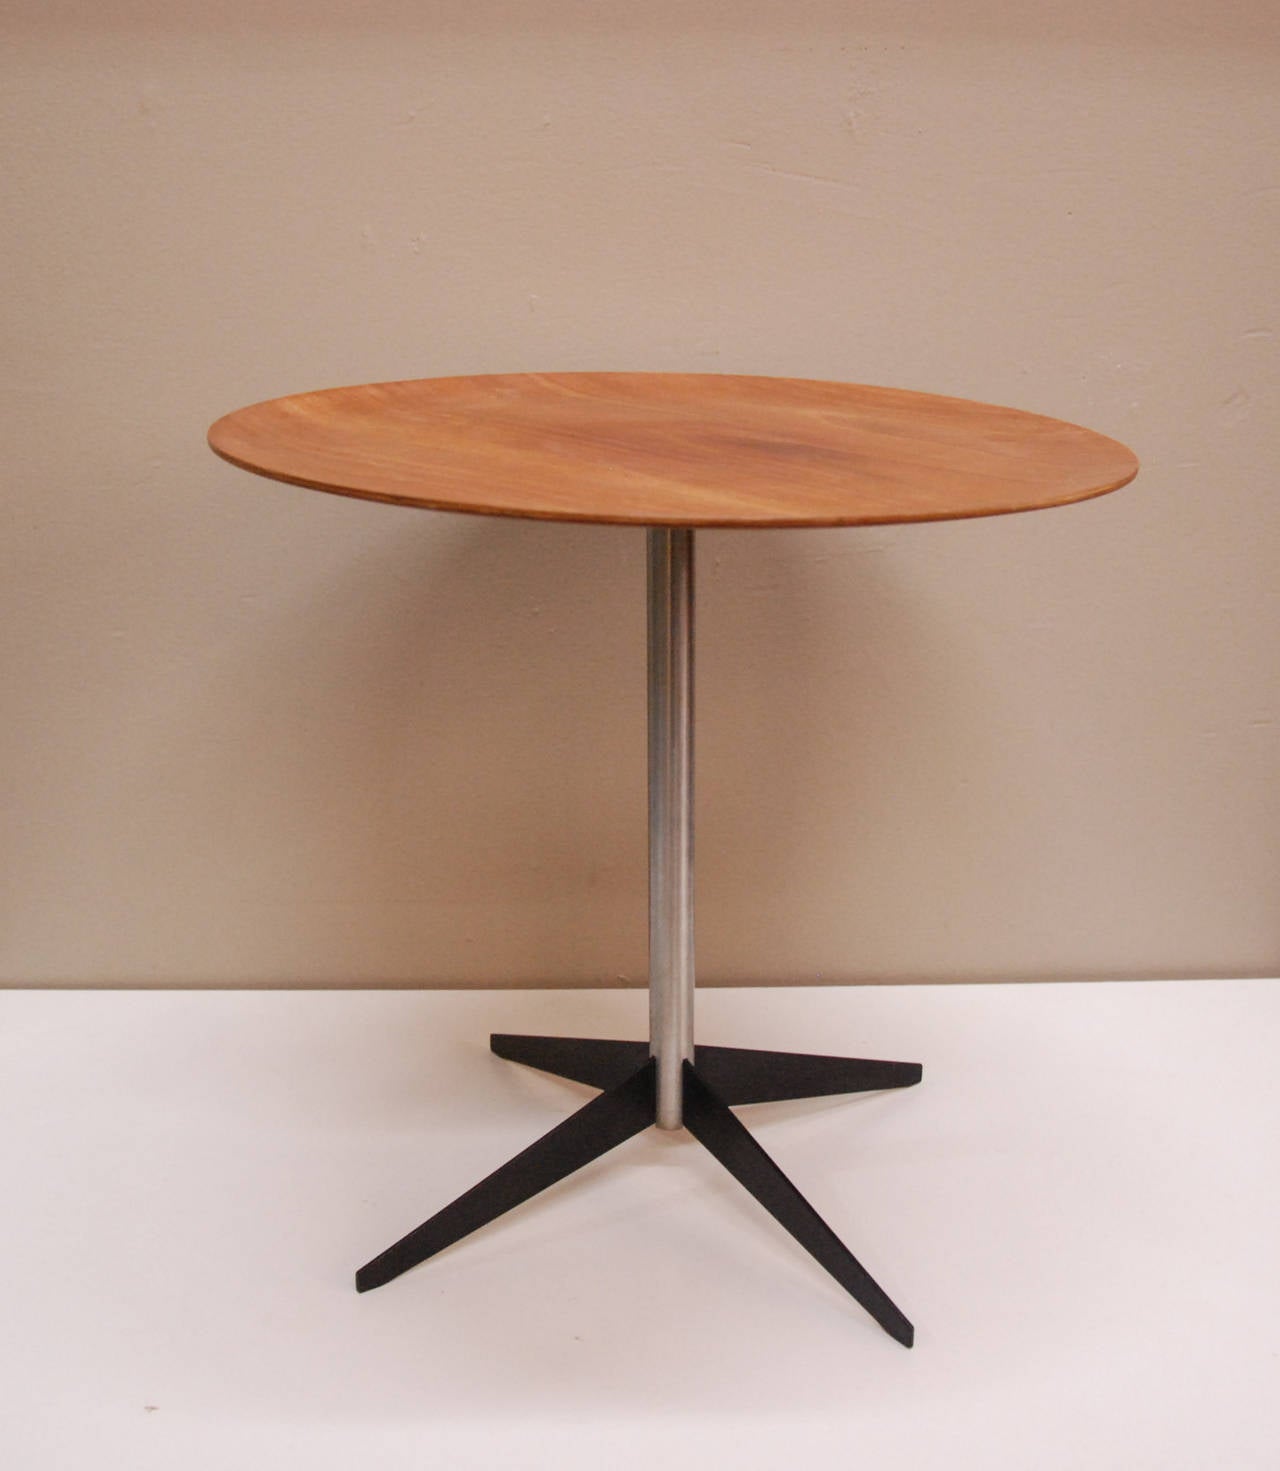 Mid-Century Modern Rare George Nelson for Herman Miller Walnut Plywood Tray Table 1955